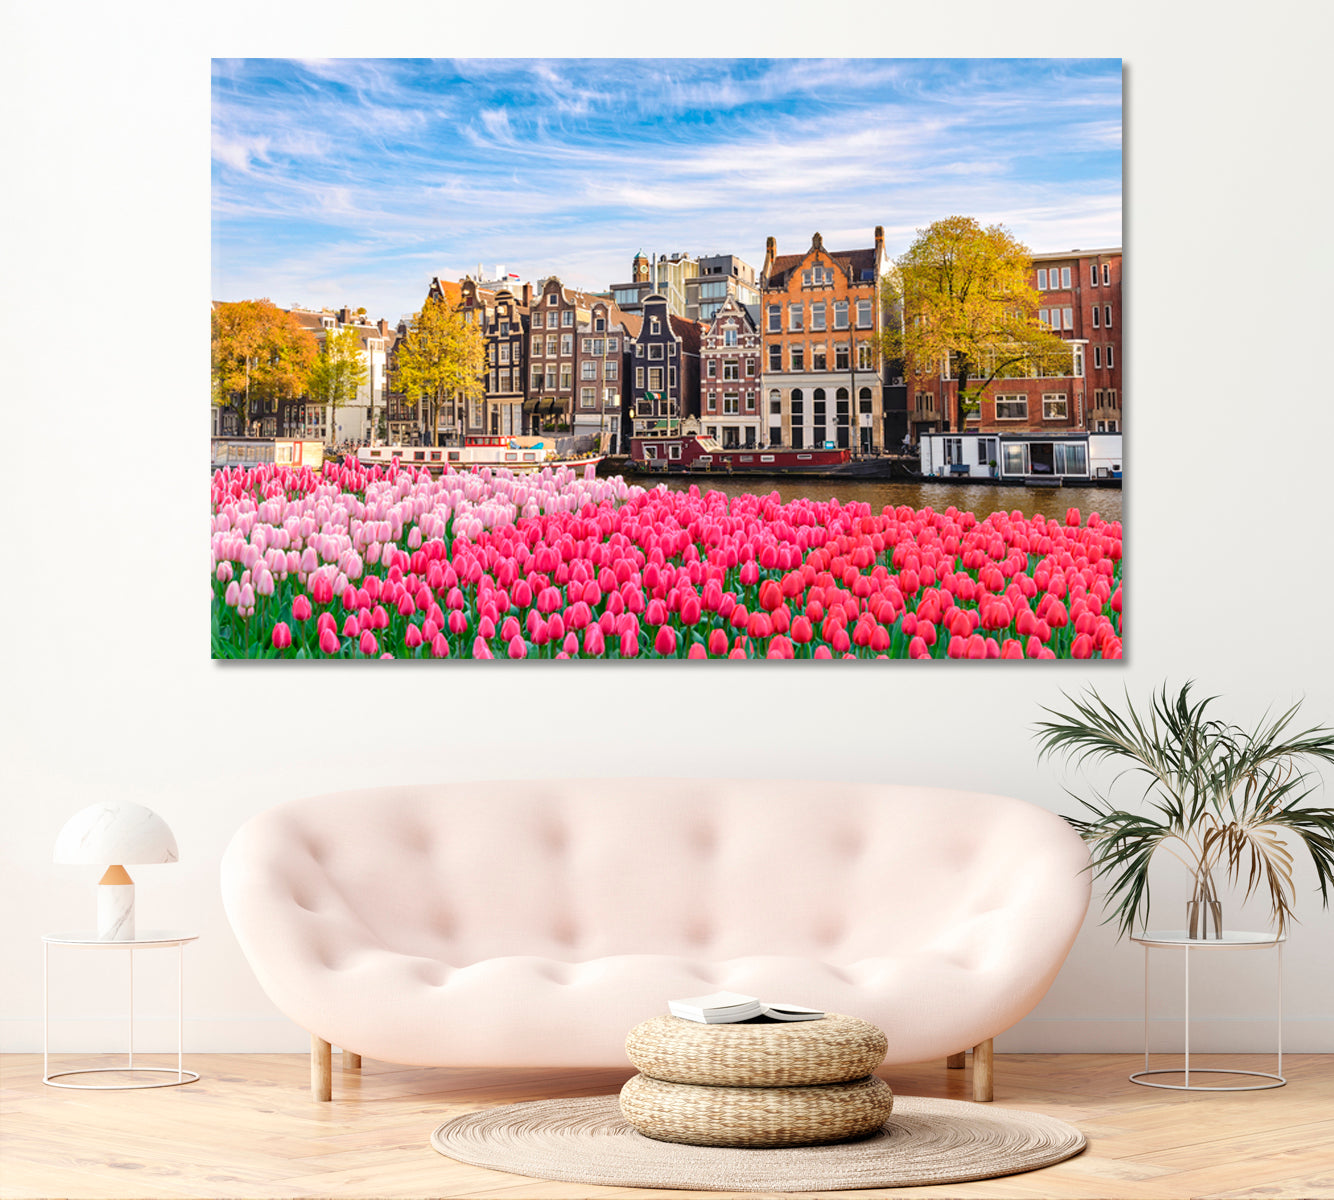 Dutch House with Spring Tulips Flowers Canvas Print ArtLexy 1 Panel 24"x16" inches 